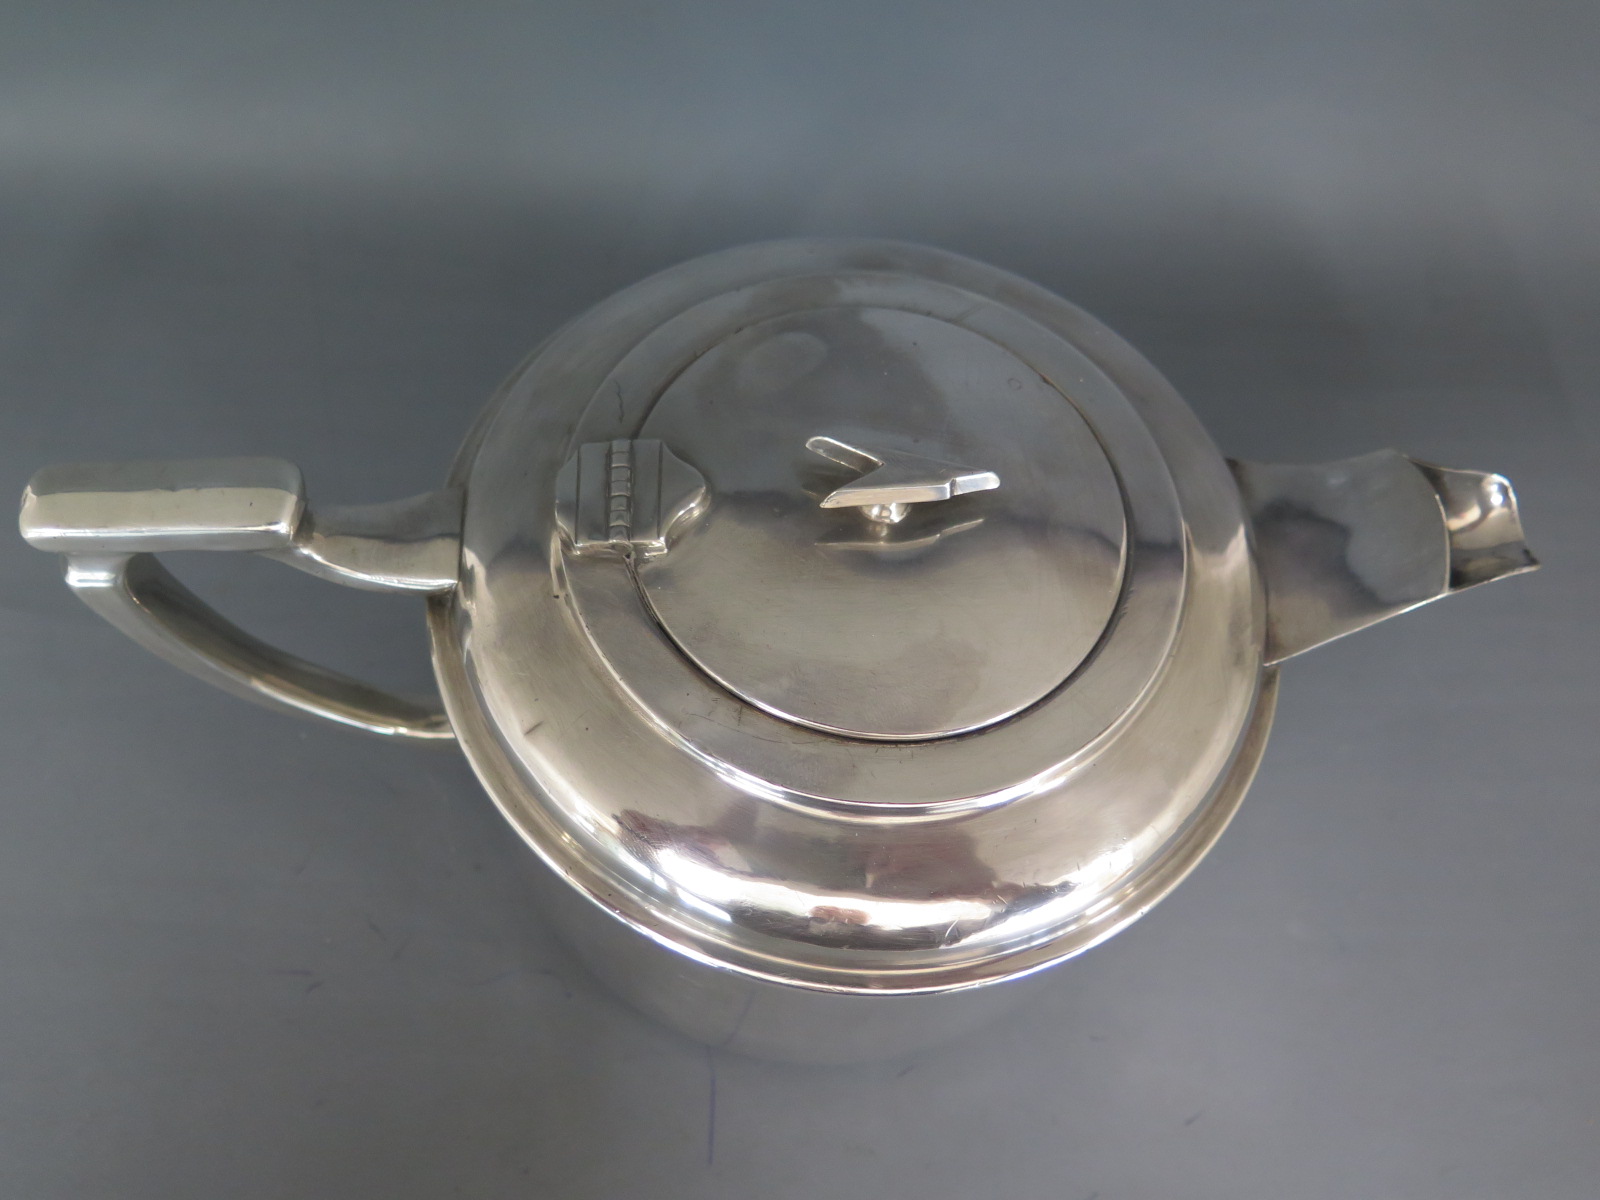 A Boac silver plated teapot marked made in England Gladwin Ltd Sheffield AW 24130 hand soldered - Image 2 of 3